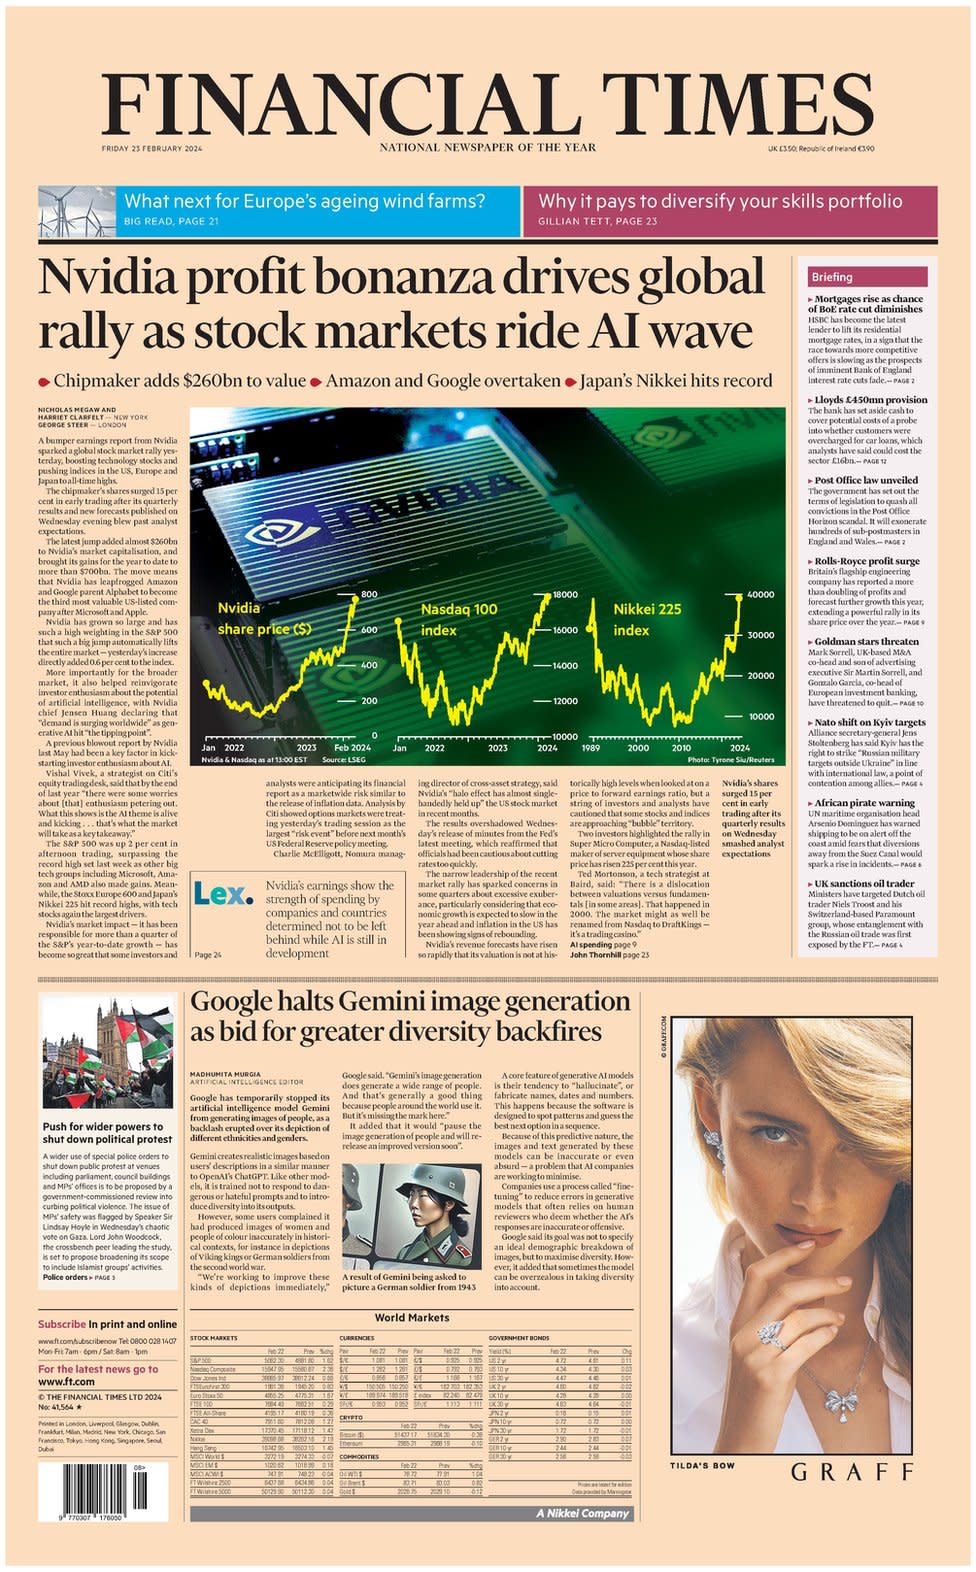 Front page of the Financial Times. The main article is about the rise in Nvidia's stock price, which contributed to the rise in the overall stock market.